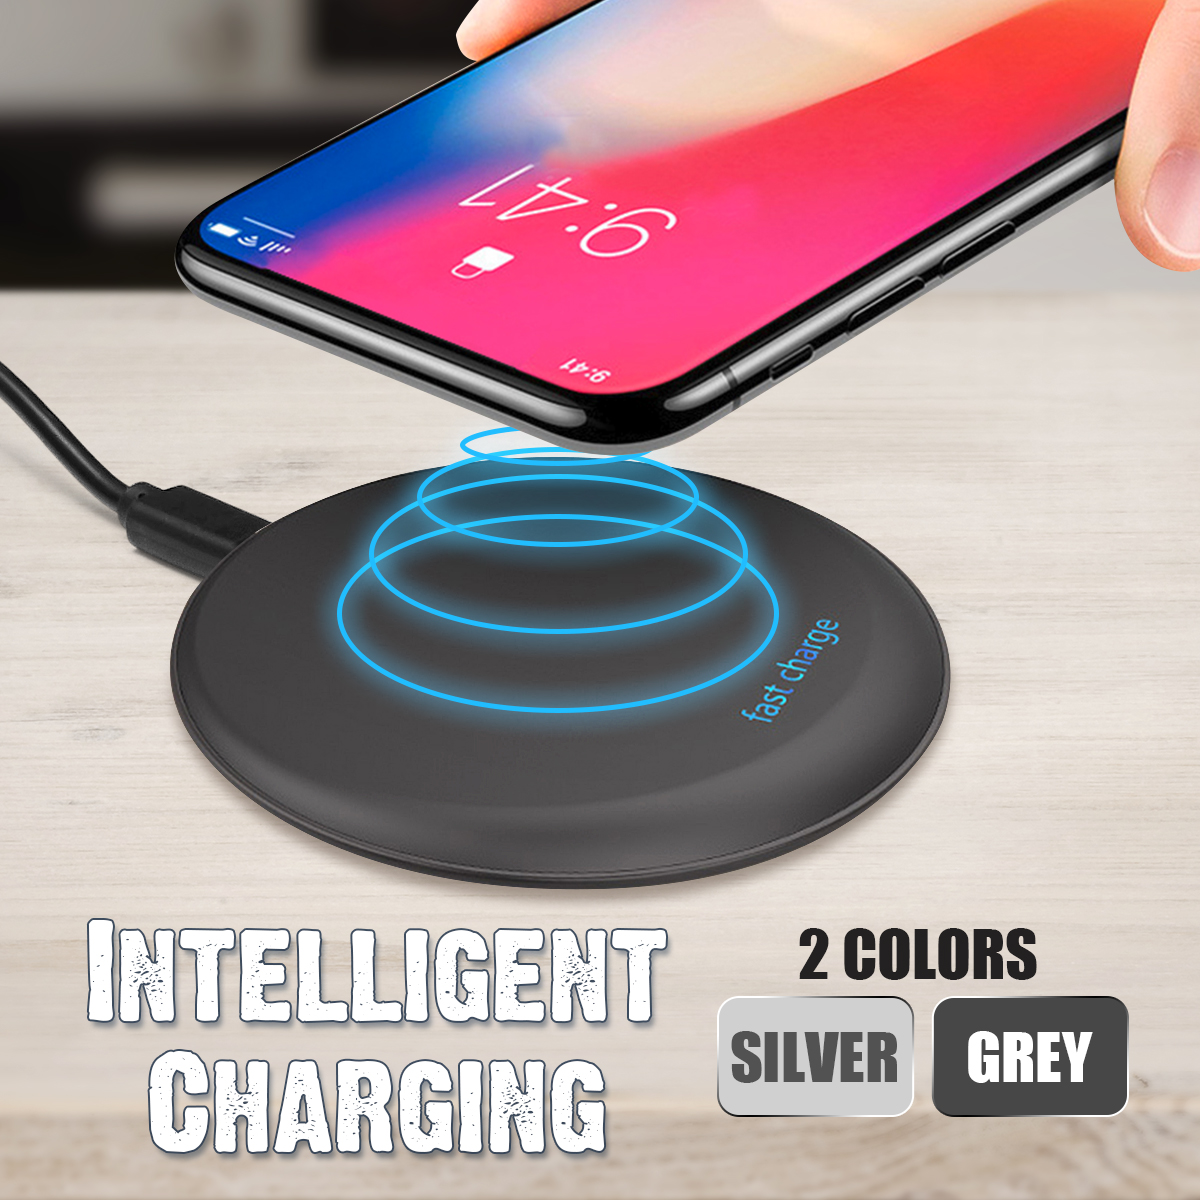 Bakeey-10W-Qi-Wireless-Charger-Fast-Charging-Pad-For-iphone-X-88Plus-Samsung-S9-S8-S7-1300175-1